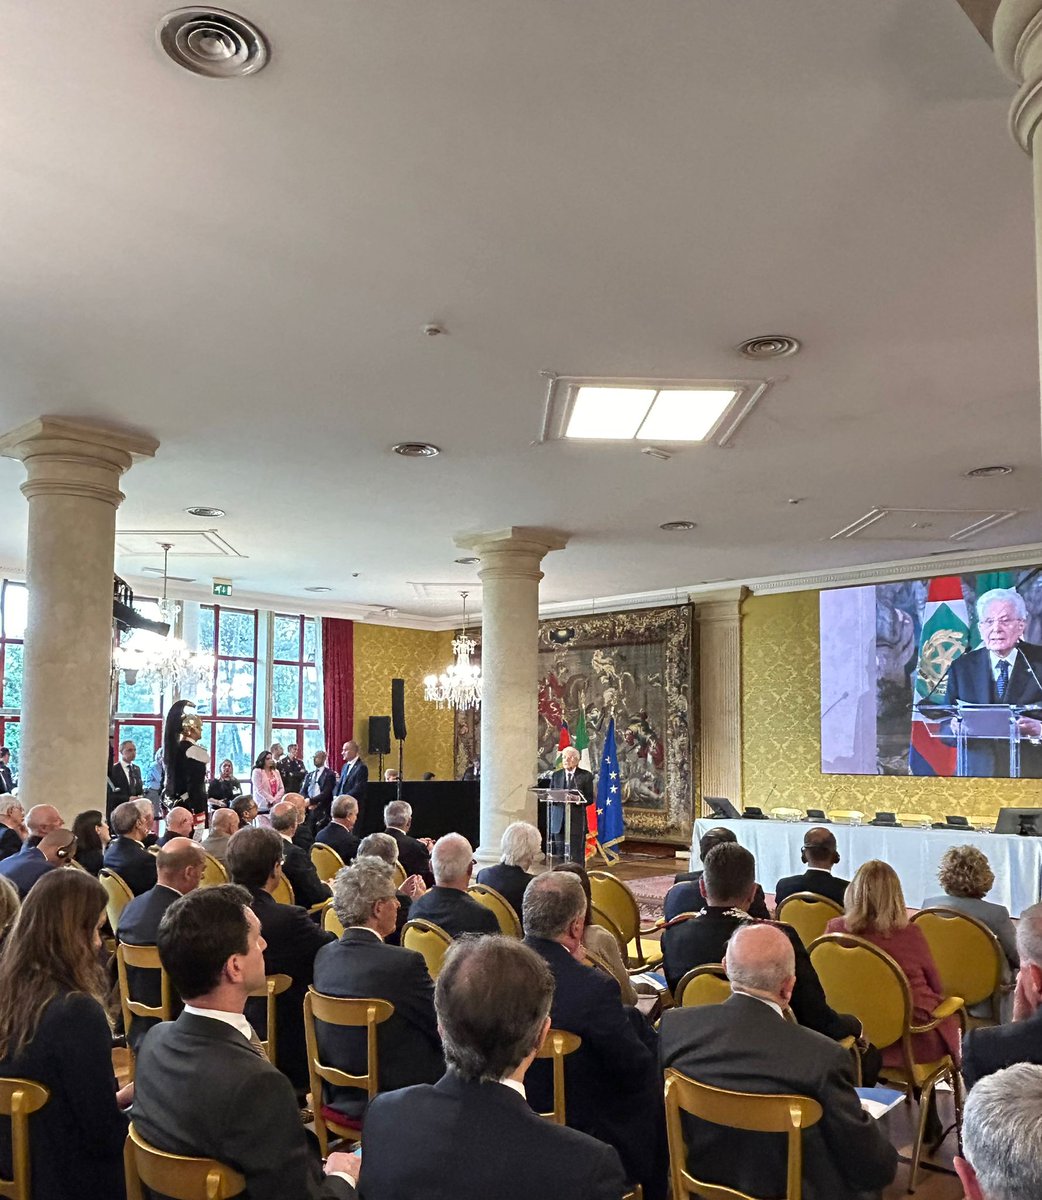 📣The inaugural day of the SIOI/@NATO International Conference #NATOat75 started with the Opening Remarks by SIOI President Amb. Riccardo Sessa and a Special Opening Address by the President of the Italian Republic, Sergio Mattarella.